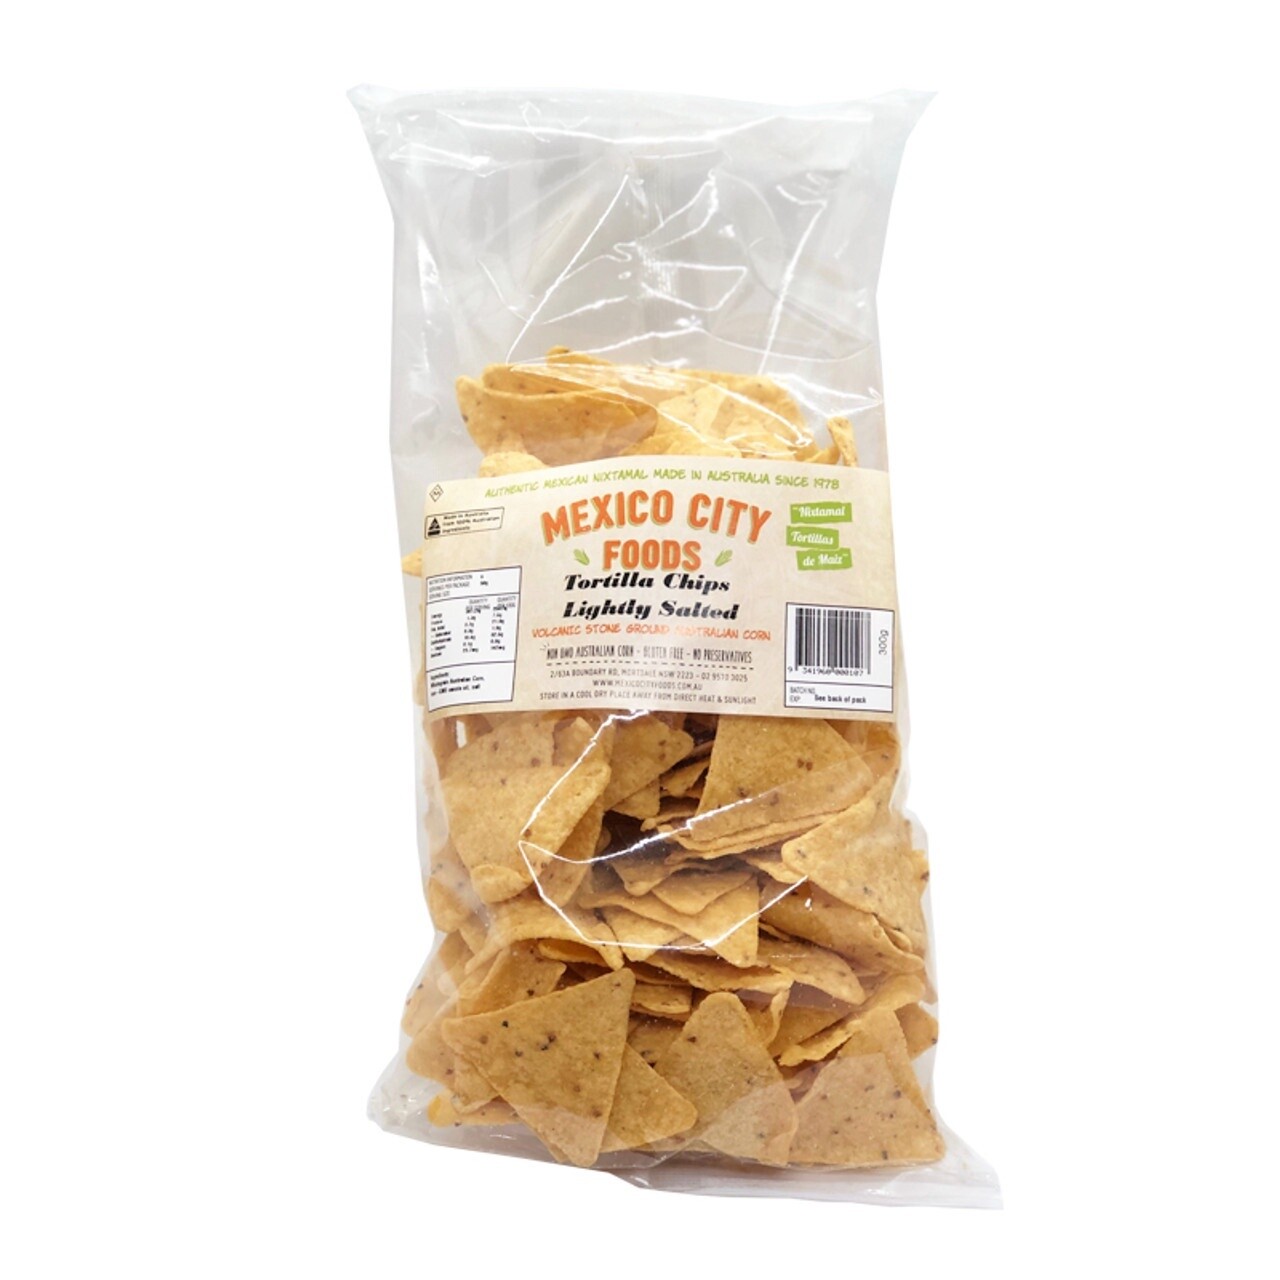 Mexico City Foods Tortilla Chips 300g